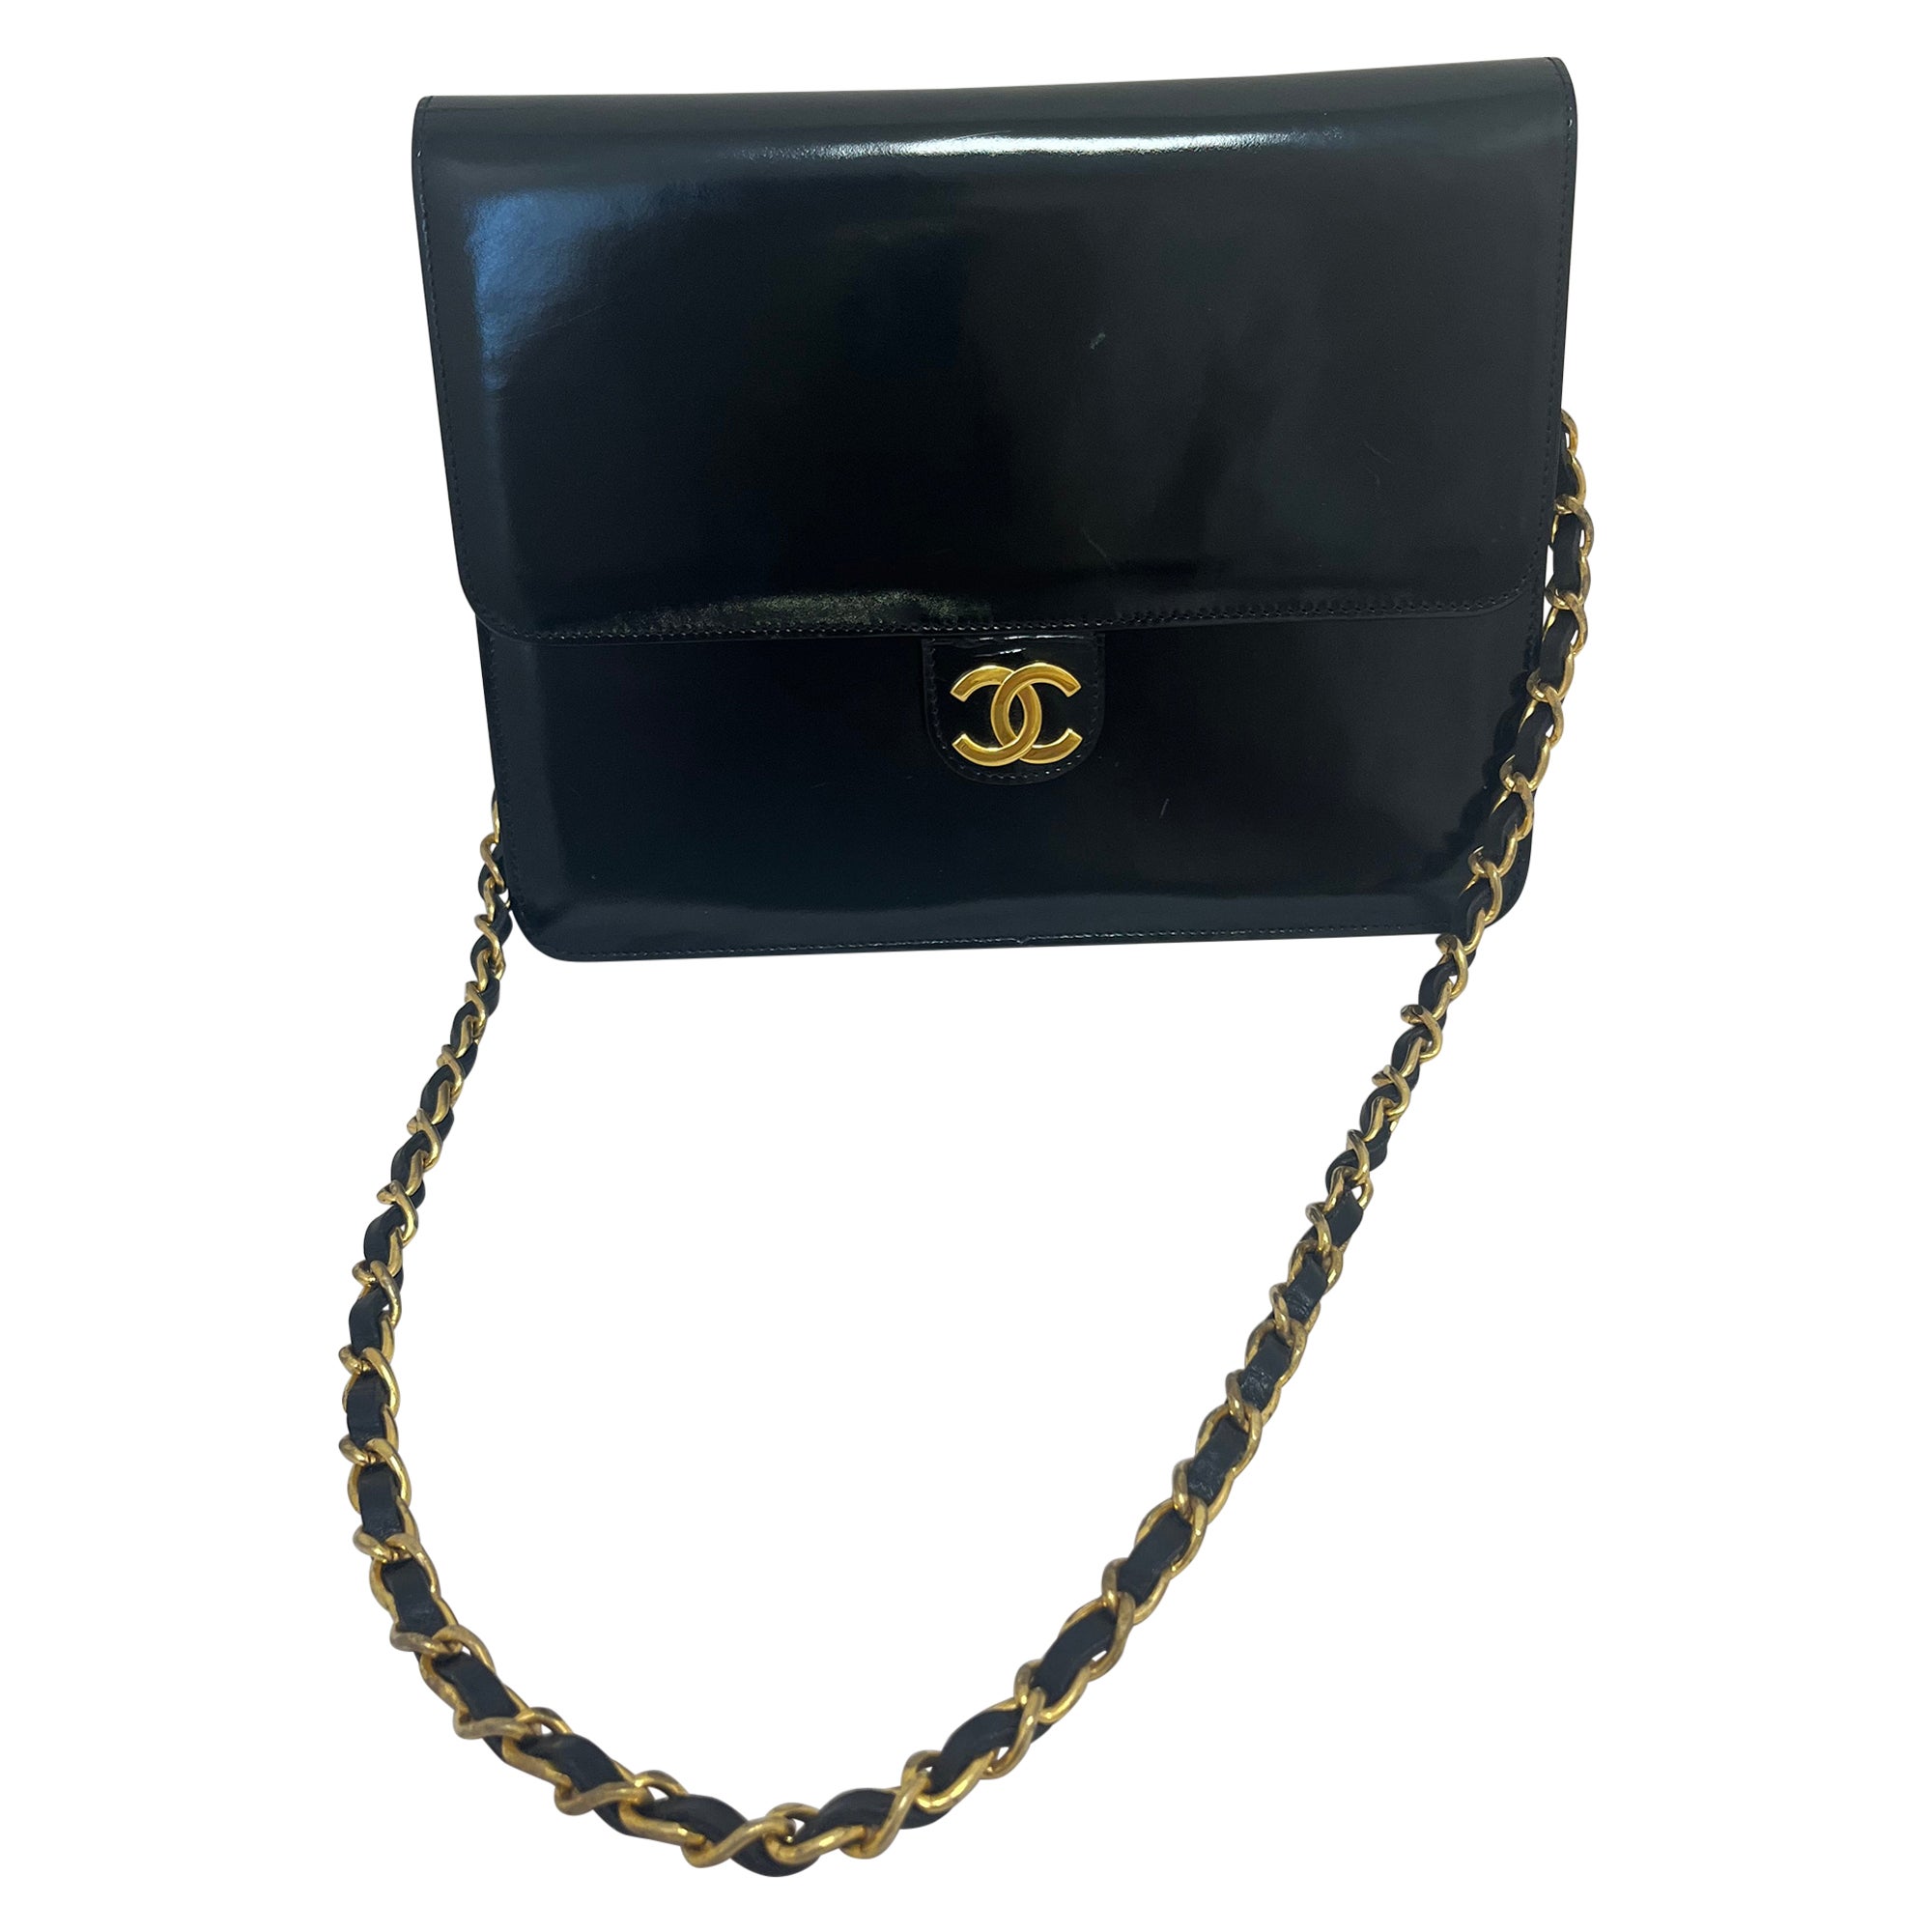 Do vintage Chanel bags have real gold?